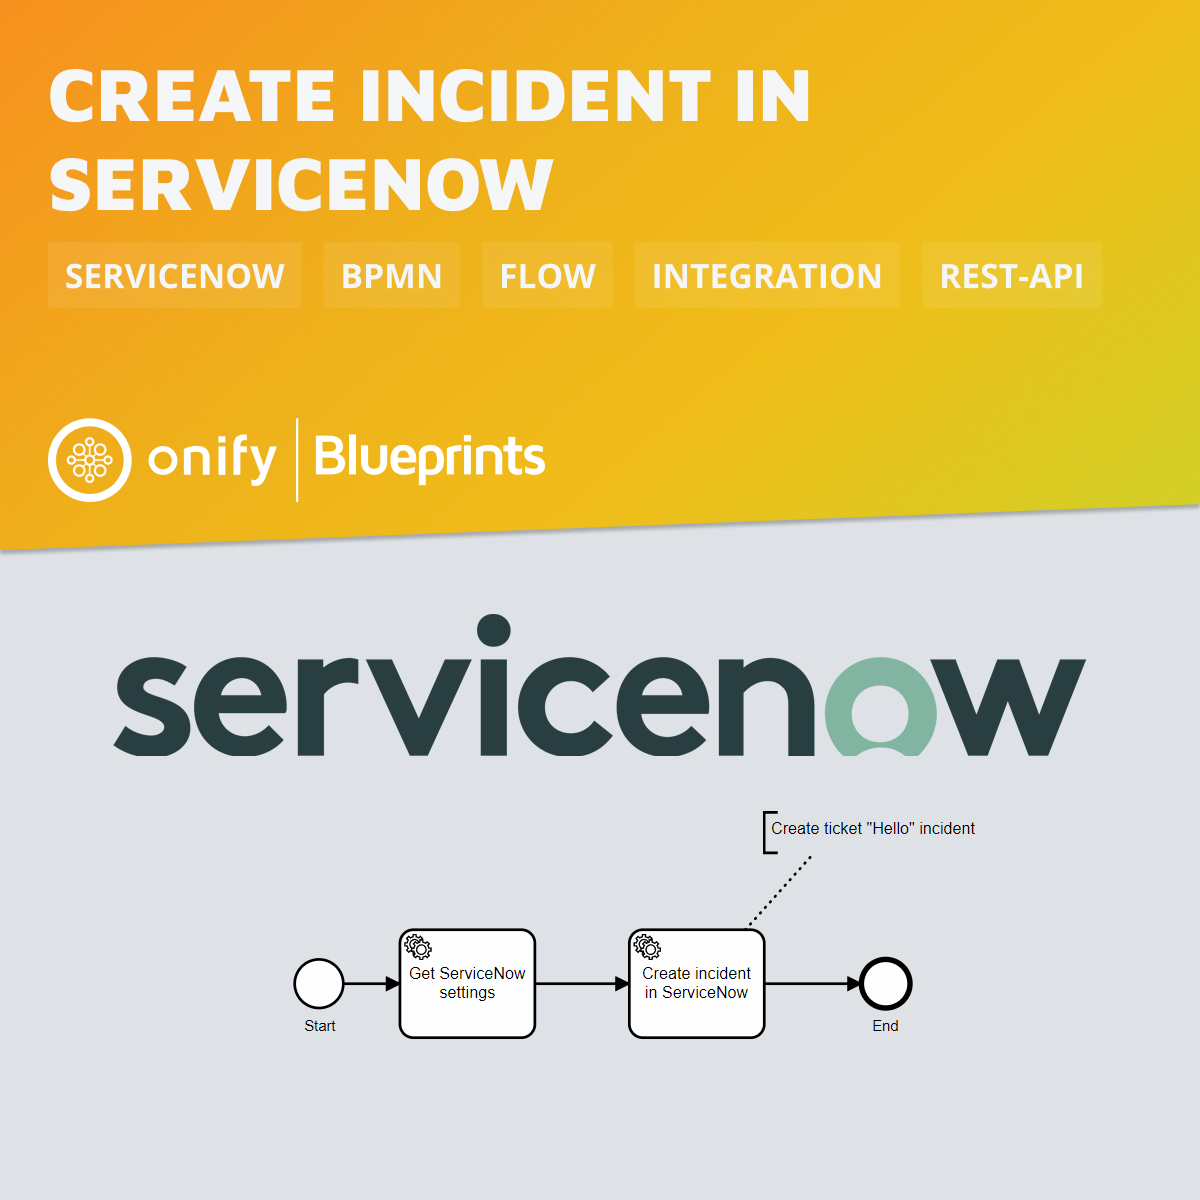 Onify Blueprint: Create incident in ServiceNow